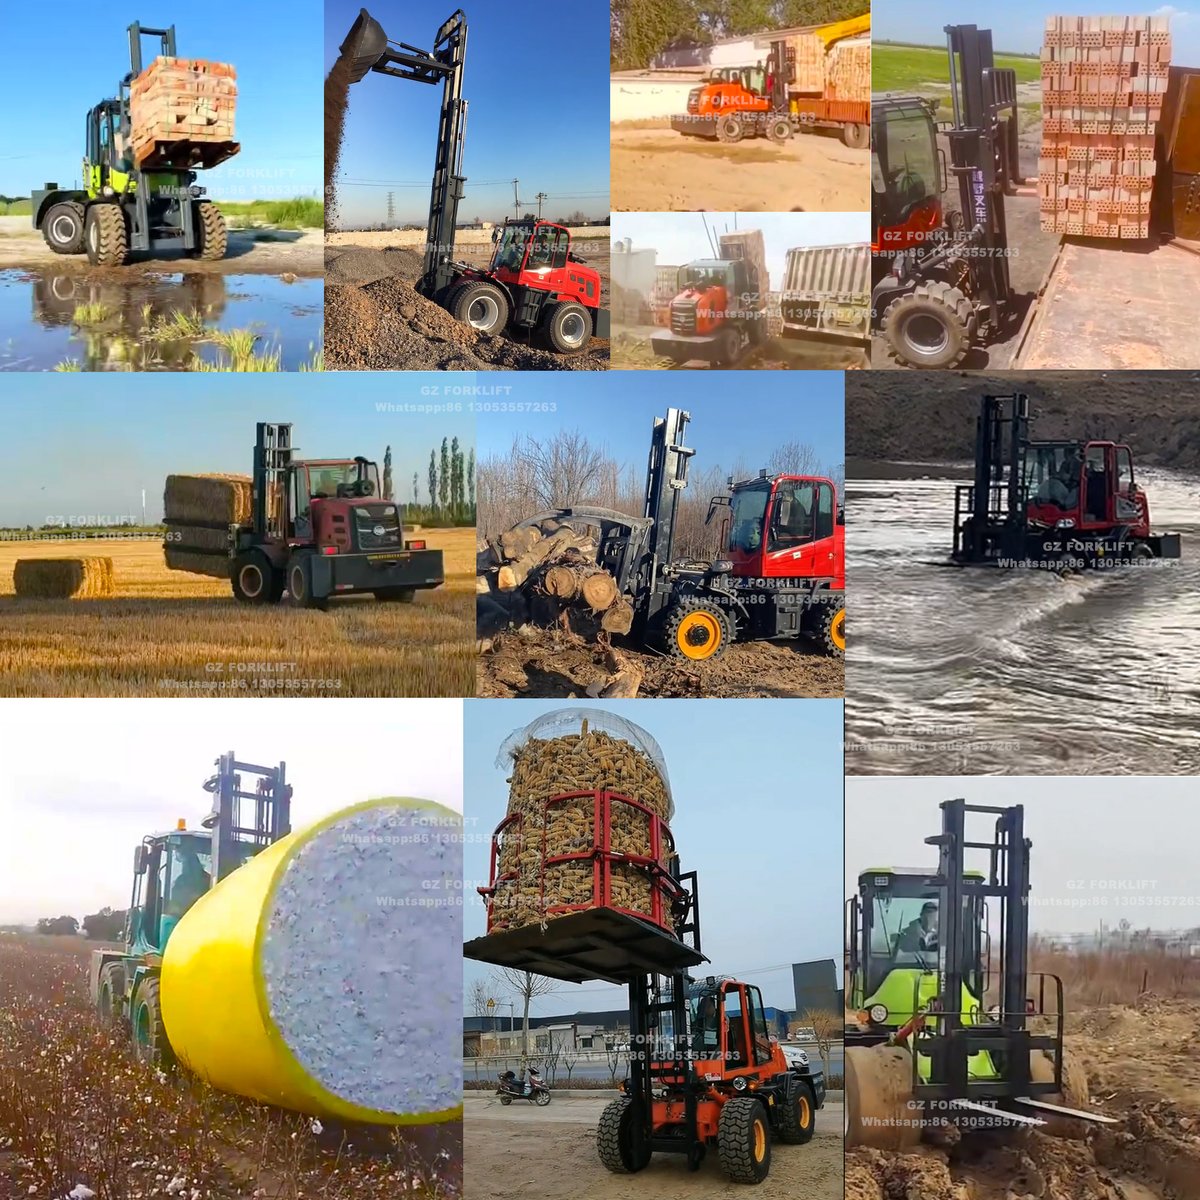 🔎 Looking for a perfect solution for your material handling needs? 📢 Look at our Rough Terrain Forklifts! allterrainforklift.cn
📲Whatsapp: 86 13053557263
#FARM #Construction #GZforklift